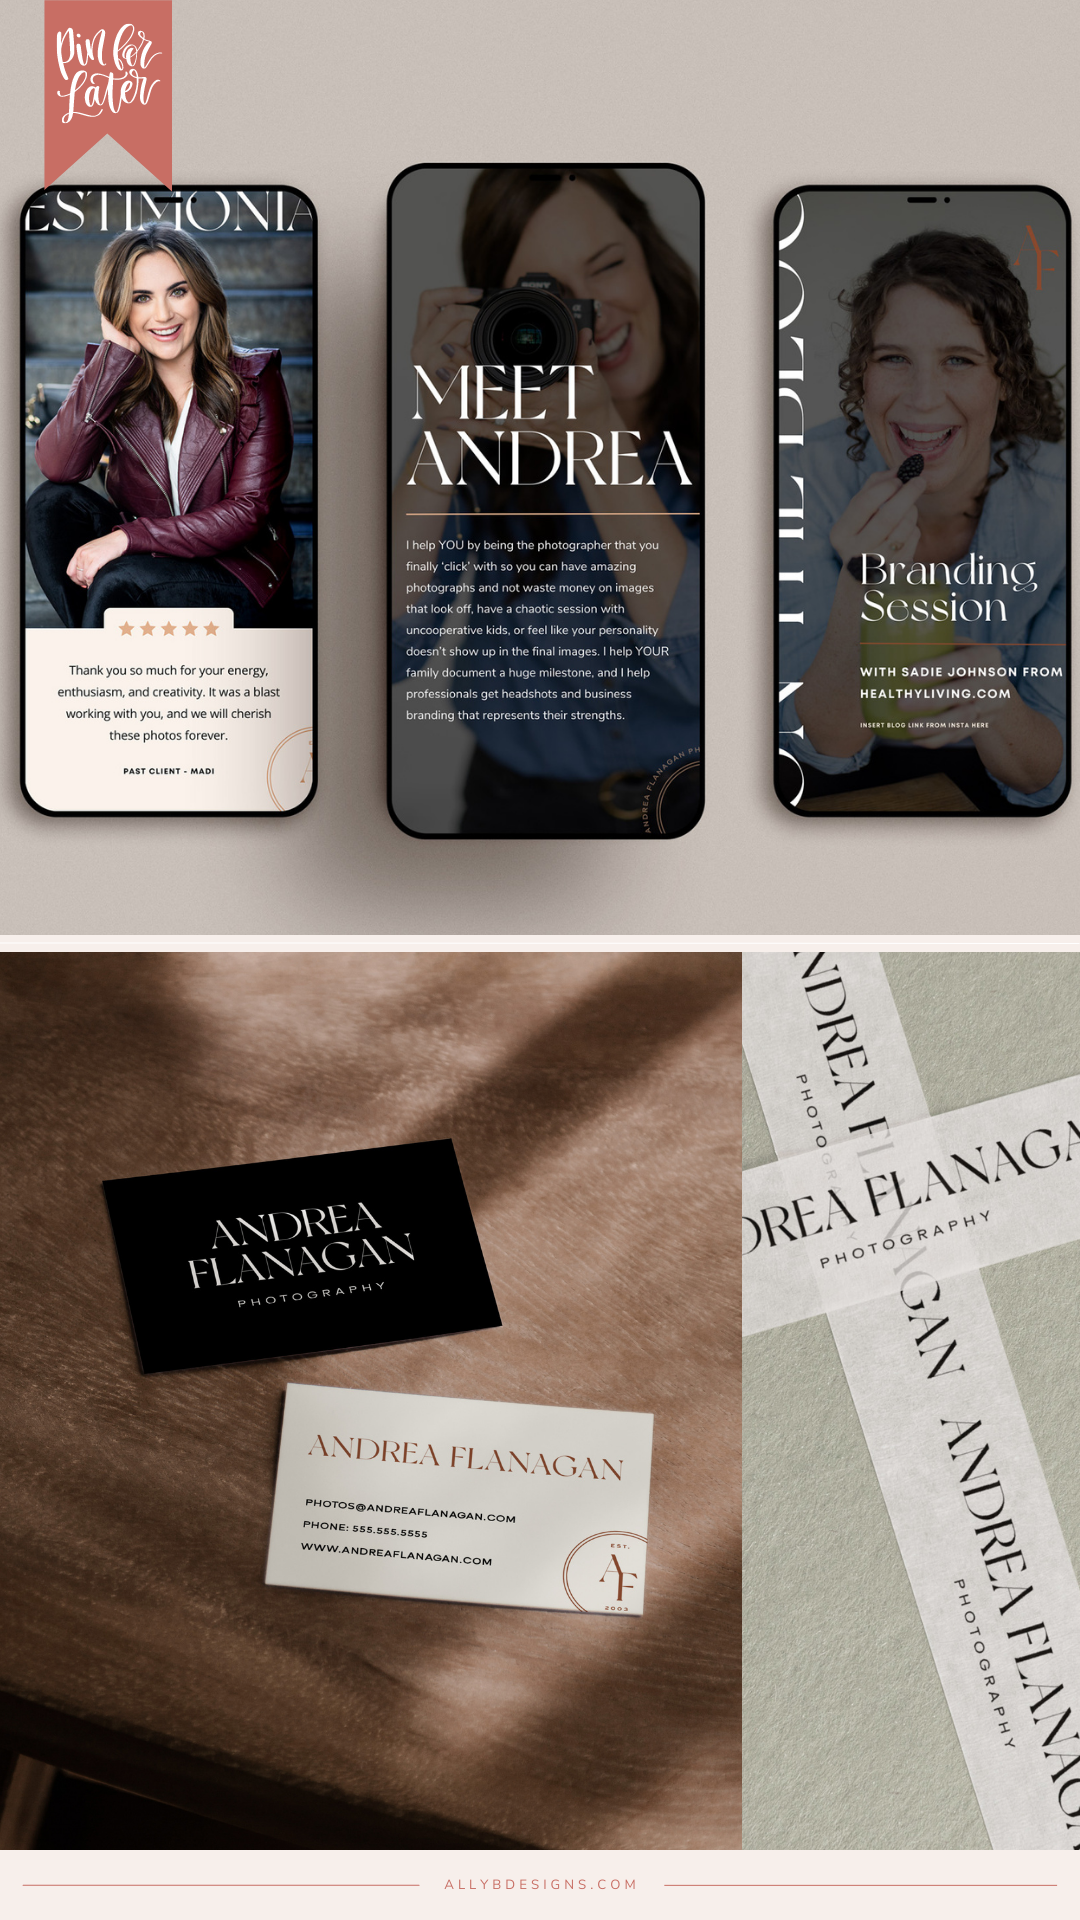 A collage of three different smart phones with different images. The first phone contains an image of a woman in a burgundy  jacket sitting on a set of stairs under the word "testimonial". beneath her is a 5-star rating and review for Andrea Flanagan photography. The second smartphone contains an image of a woman behind a sony camera. There is text above the photo that reads "Meet Andrea" and includes a short description of Andrea Flanagan. The third phone contains an image of a woman drinking a yellow beverage and eating a blackberry with text to the right that reads "on the blog". and text in the center of the image that reads "Branding session with sadie johnson from healthyliving.com.

there is a second image that contains photos of Andrea Flanagans business cards and packing tape with her custom branding printed on it.